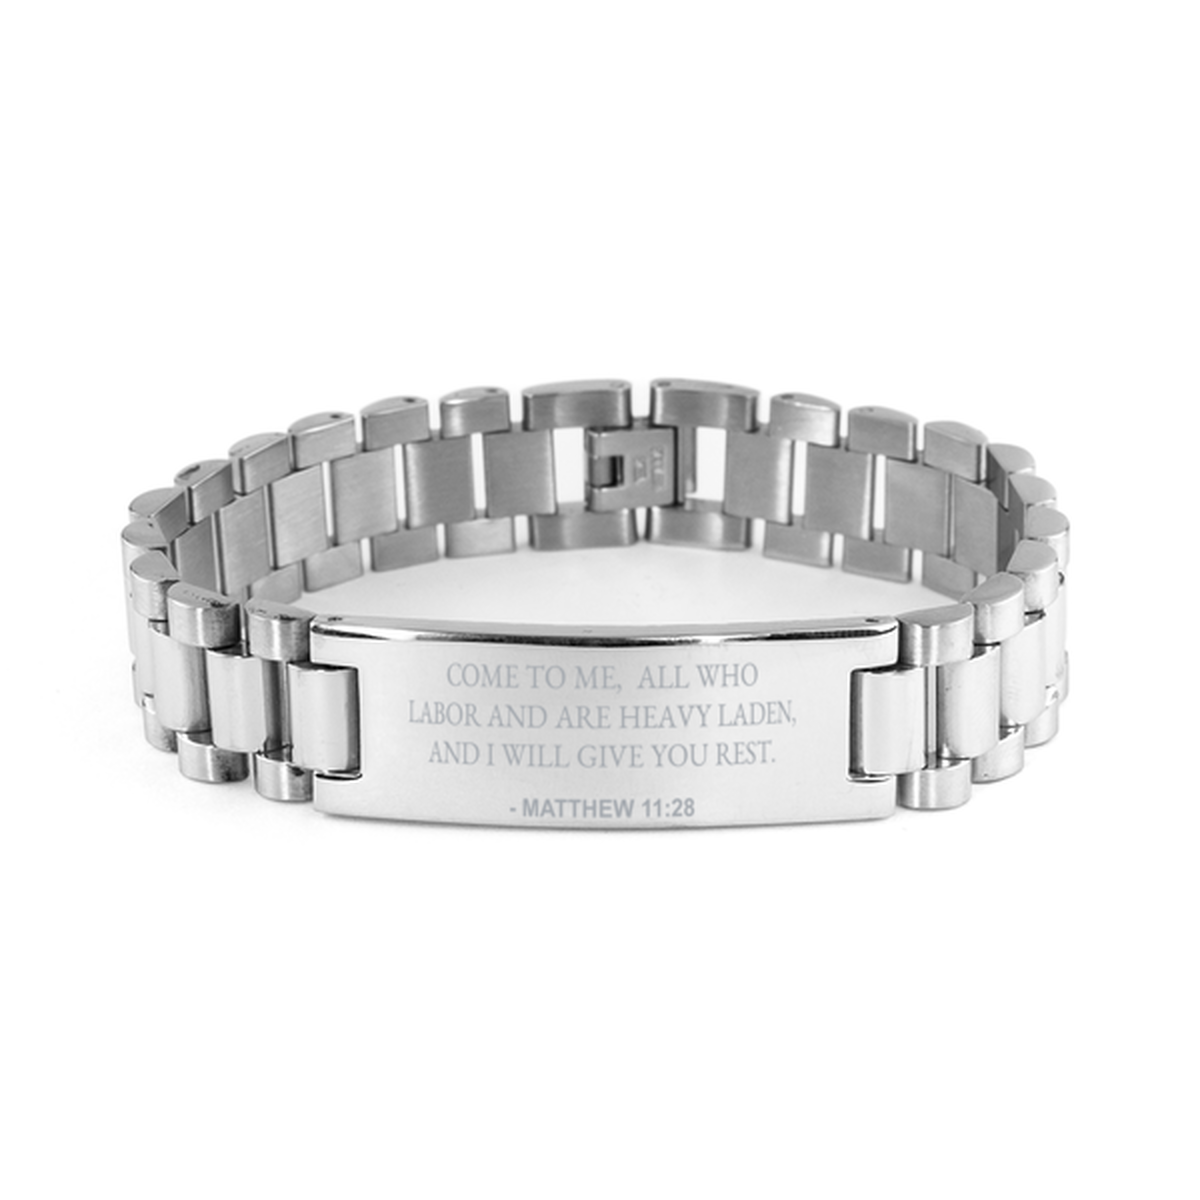 Christian Ladder Stainless Steel Bracelet, Matthew 11:28 Come To Me, All Who Labor And Are Heavy Laden, Motivational Bible Verse Gifts For Men Women